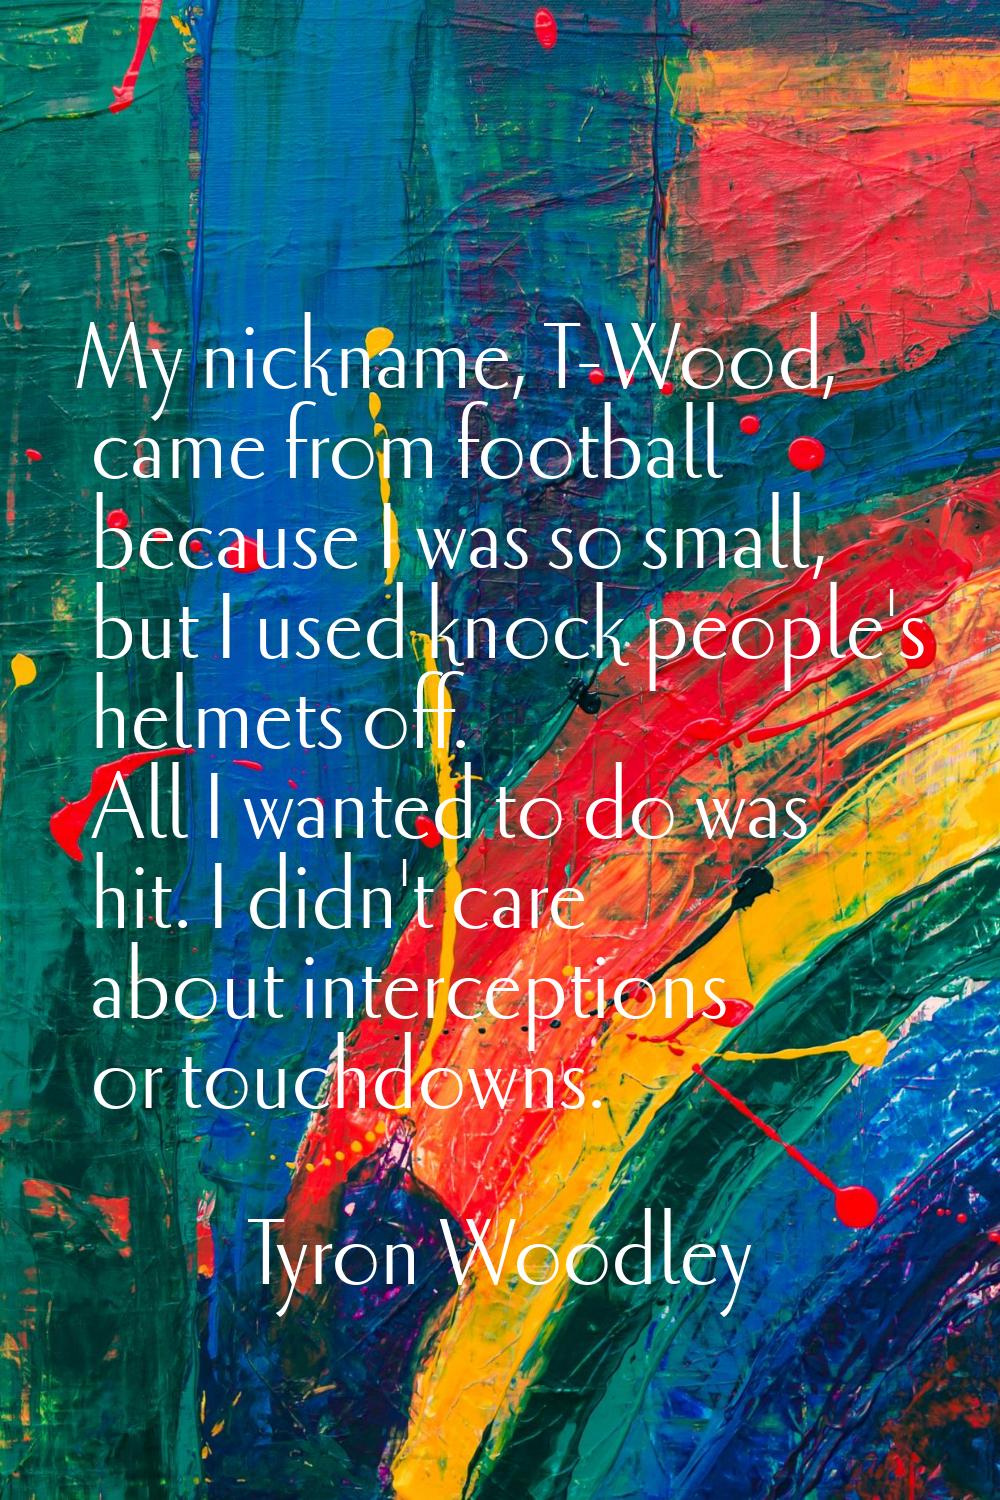 My nickname, T-Wood, came from football because I was so small, but I used knock people's helmets o